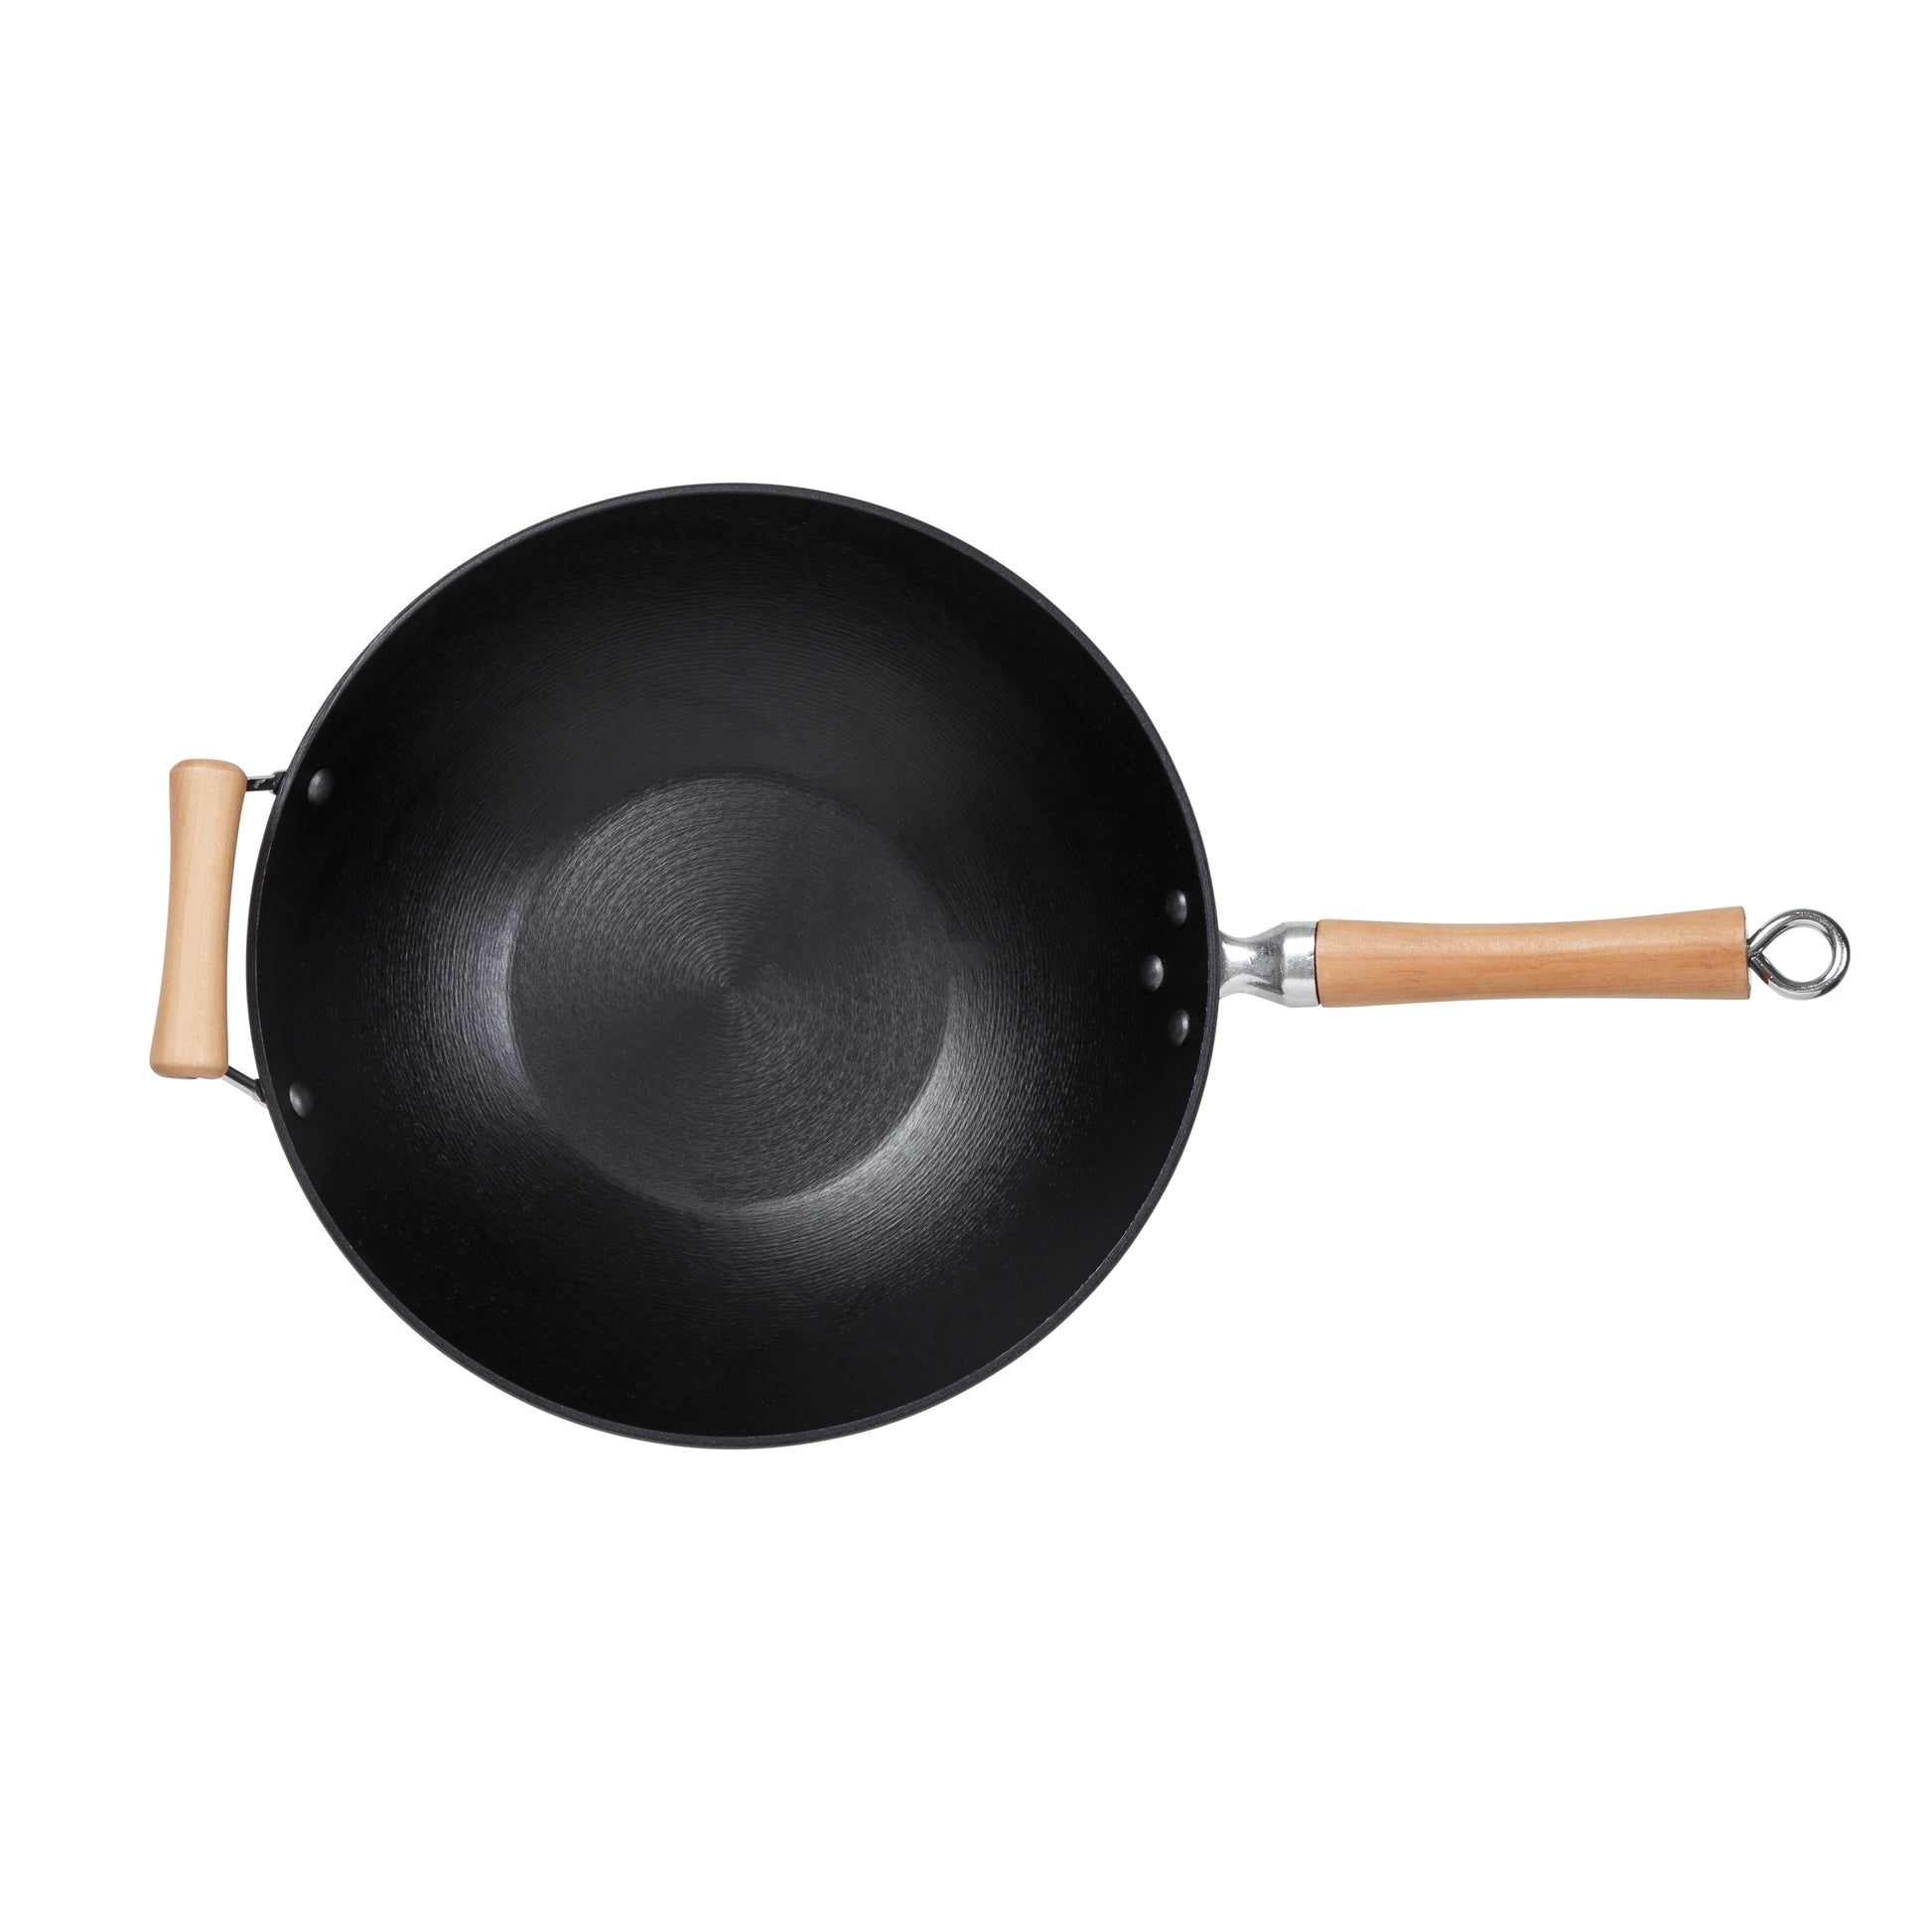  Cast Iron Wok with Handle - Seasoned 14 Inch Flat Bottom Wok  for Deep Frying Pan with Flat Base for Stir-Fry, Grilling, Frying, Steaming  - For Authentic Asian, Chinese Food: Home